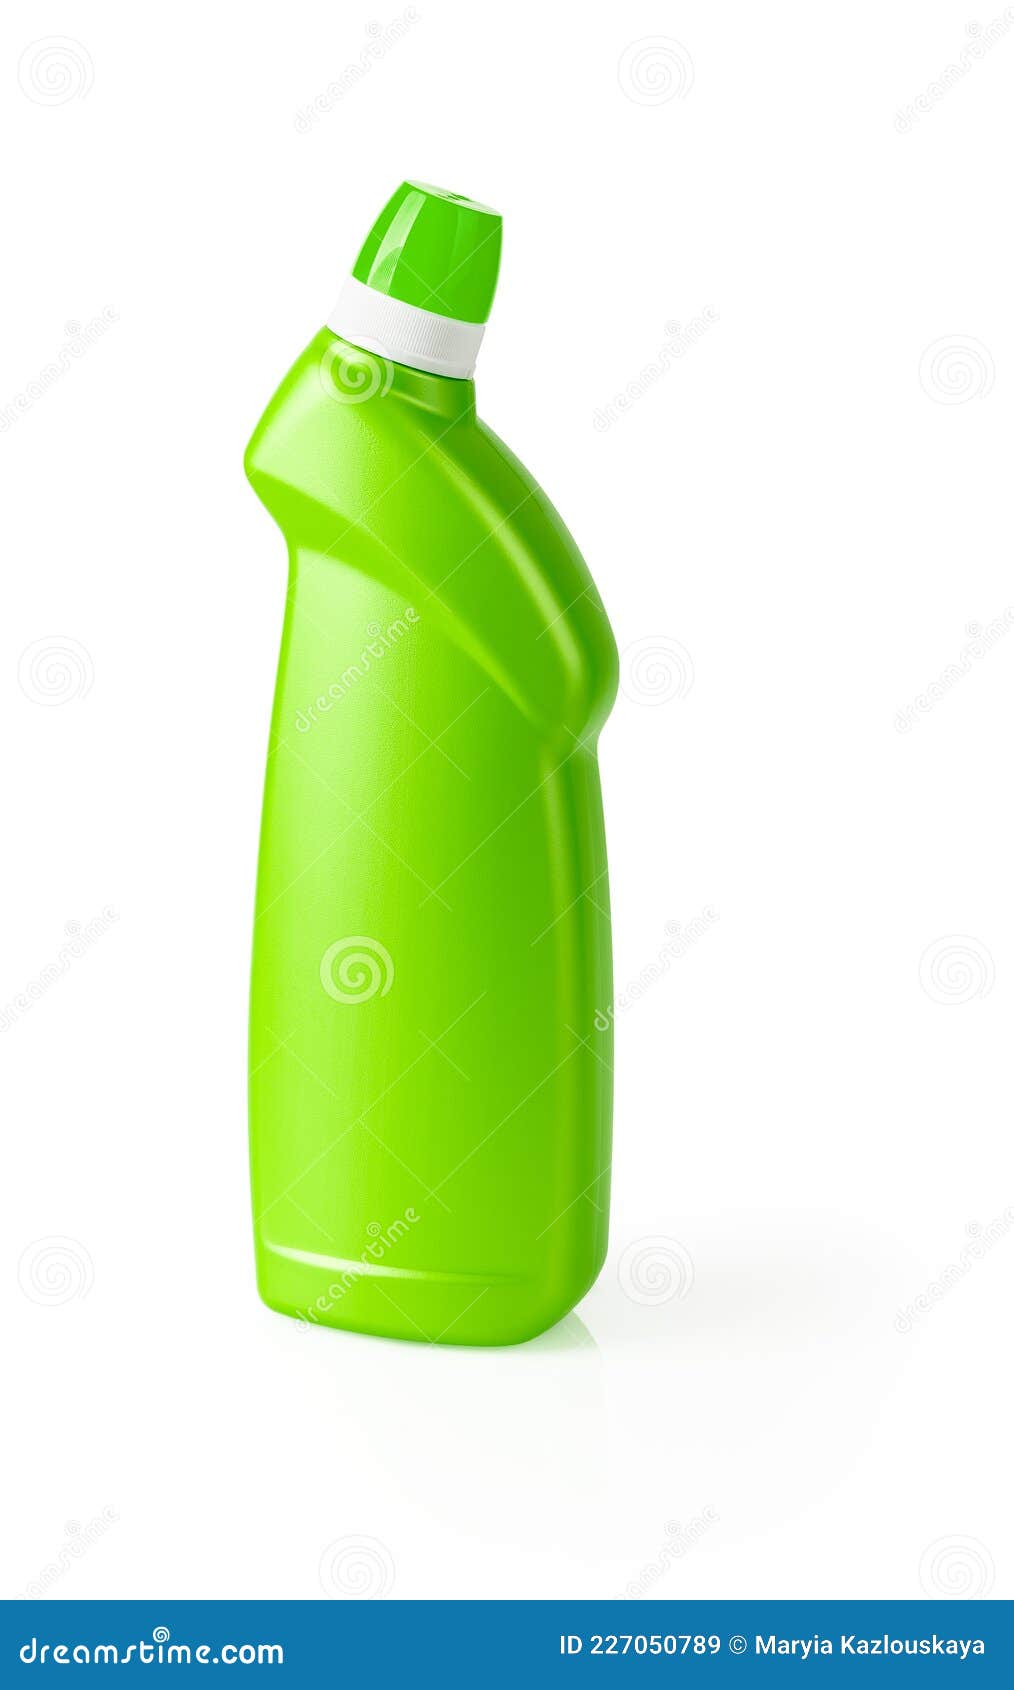 Toilet Cleaner Green Bottle Isolated on White Background. Unlabeled Plastic  Container of Liquid Bleach Disinfectant for Household Stock Image - Image  of blank, house: 227050789